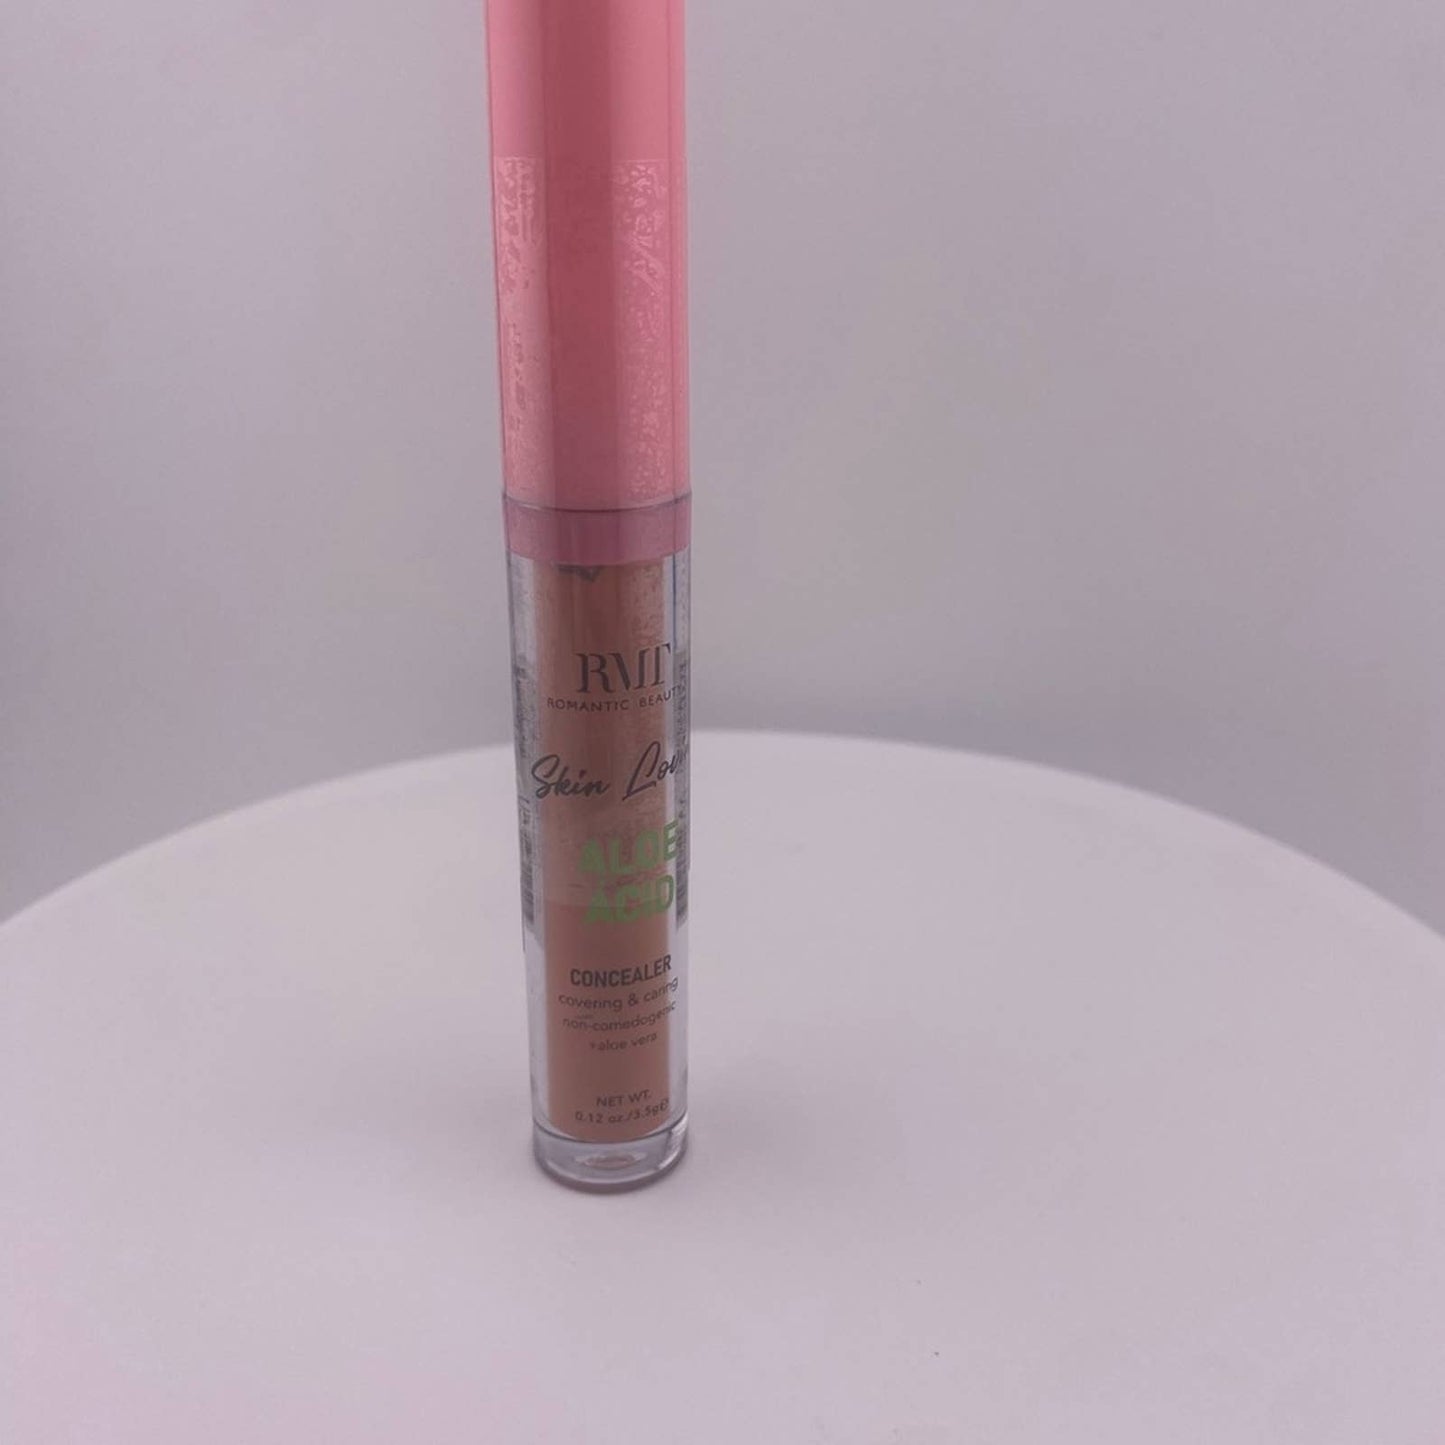 Romantic Beauty Concealer with Aloe Vera and Hyaluronic Acid